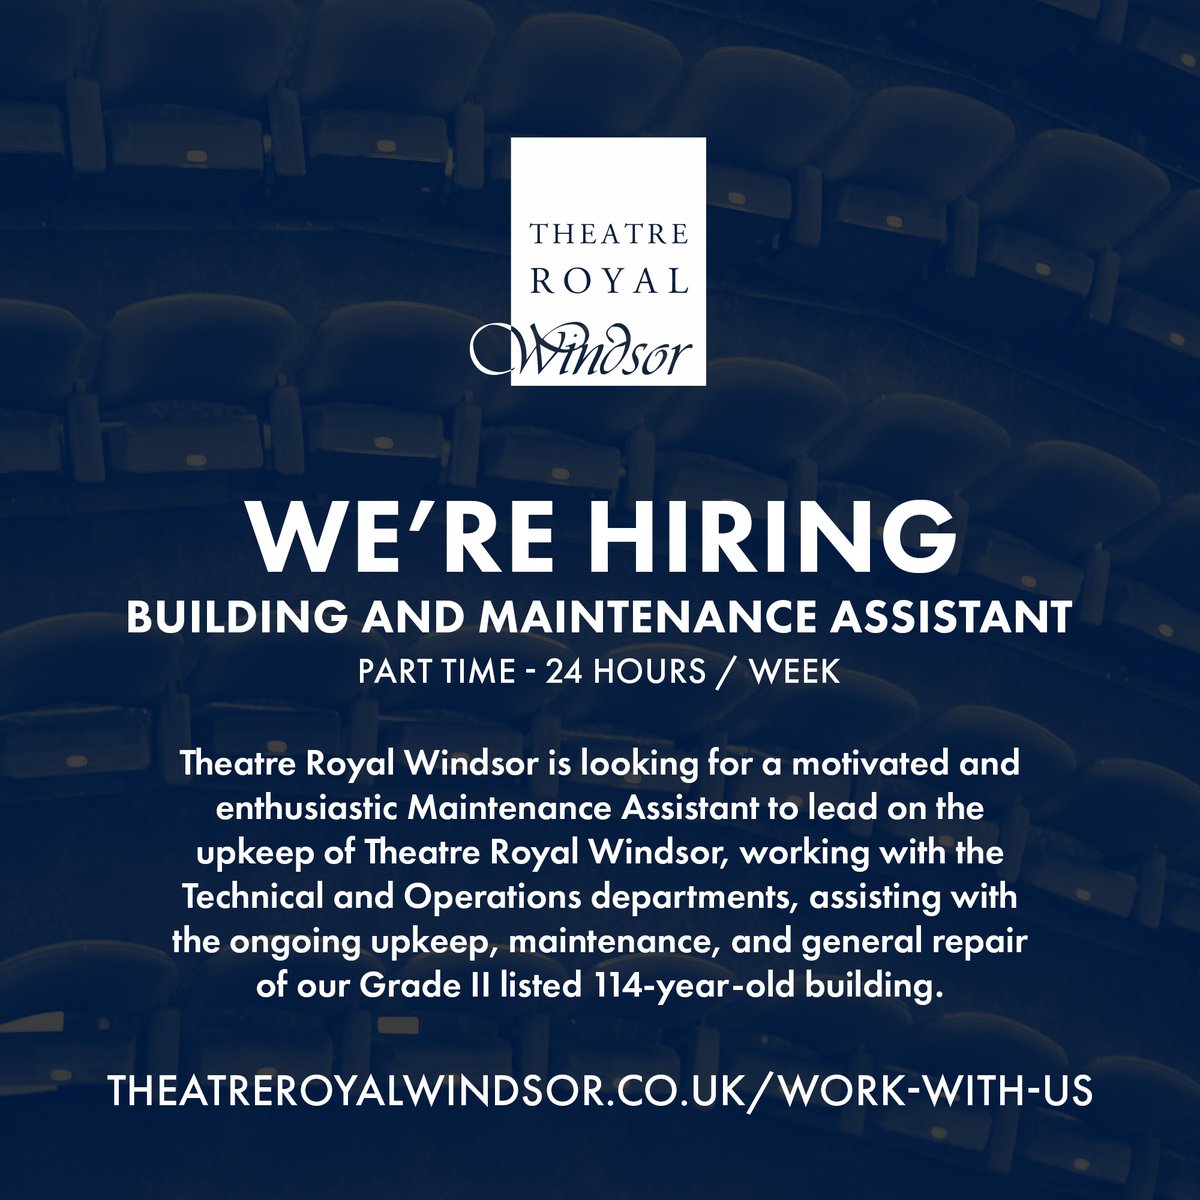 🪛 We're hiring for a Building & Maintenance Assistant to help look after our Grade II listed building. 🔗 Find out more about the role and how to apply on our website: theatreroyalwindsor.co.uk/work-with-us/